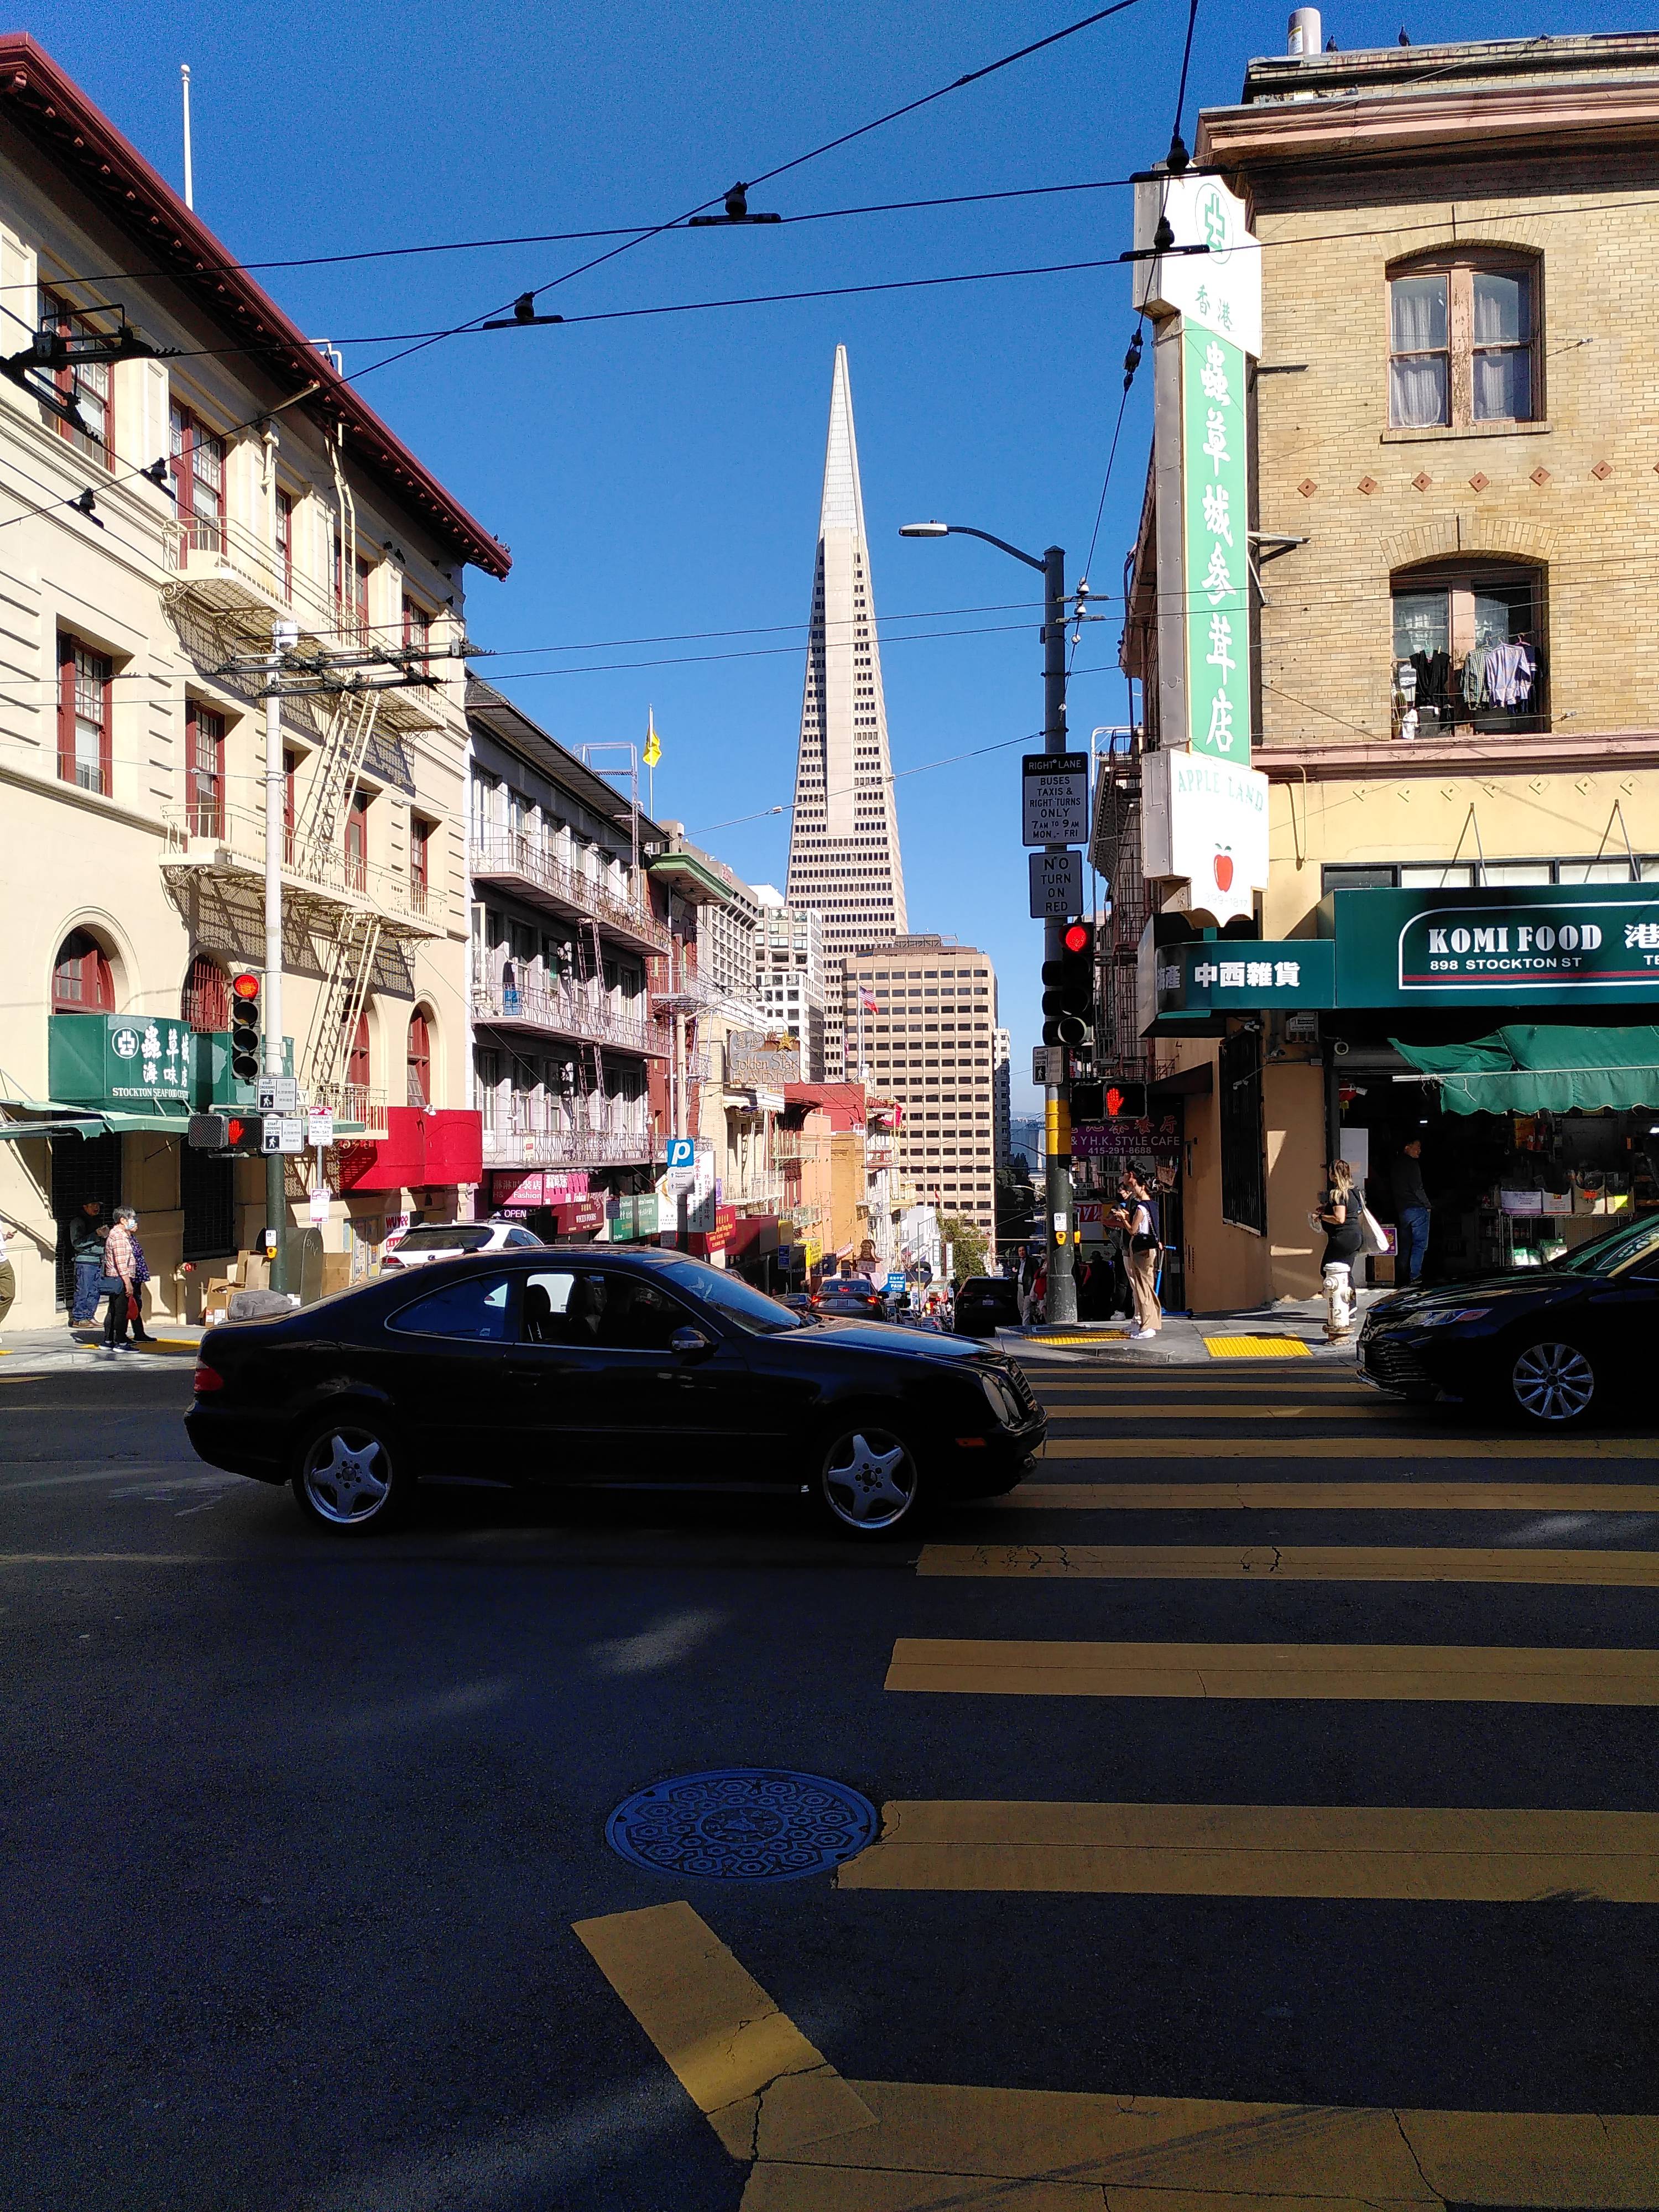 A crossing with low houses with chinese signs. In the background a famous SF scryscraper.